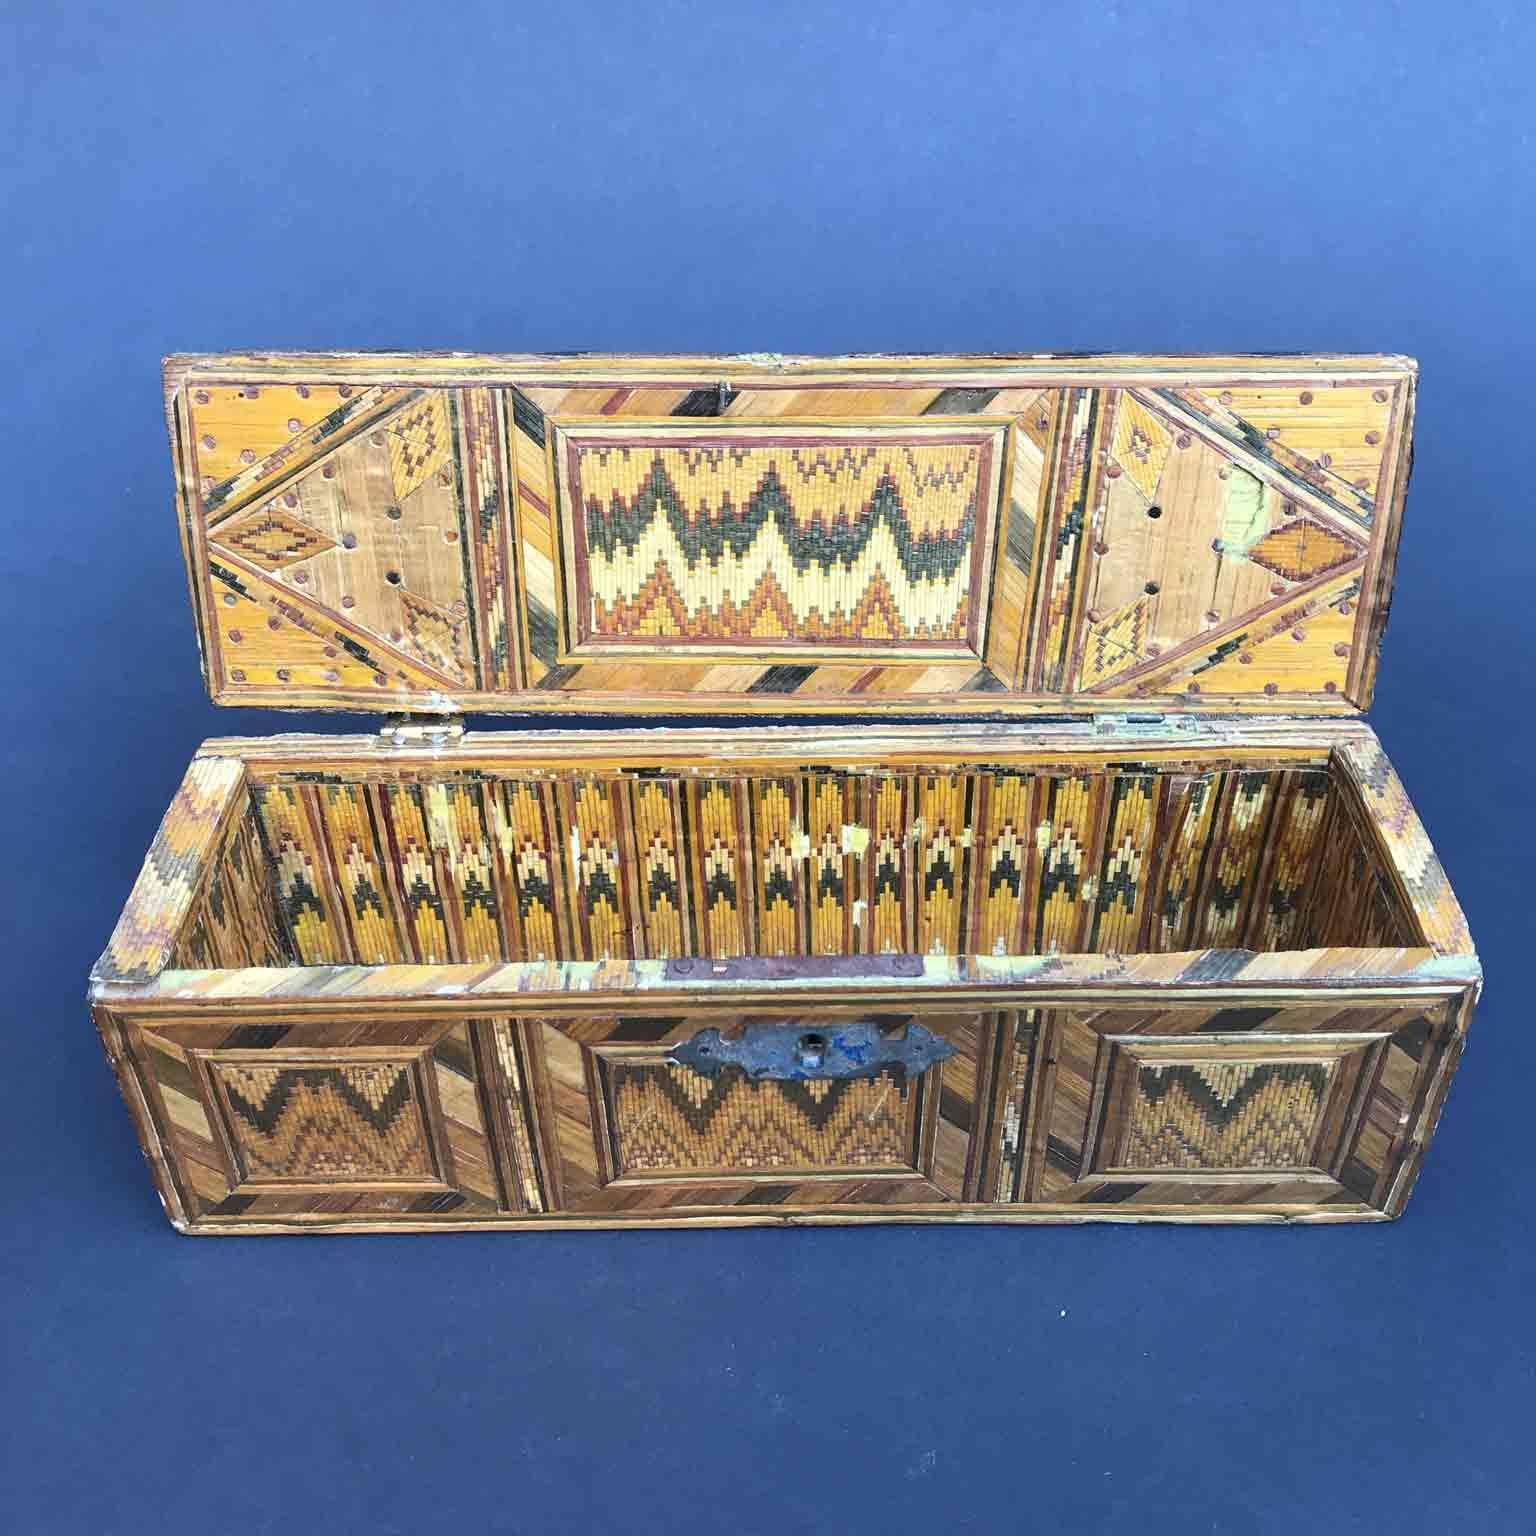 Italian 19th Century Braided Straw Box from a Monastery in Umbria Region In Good Condition For Sale In Milan, IT